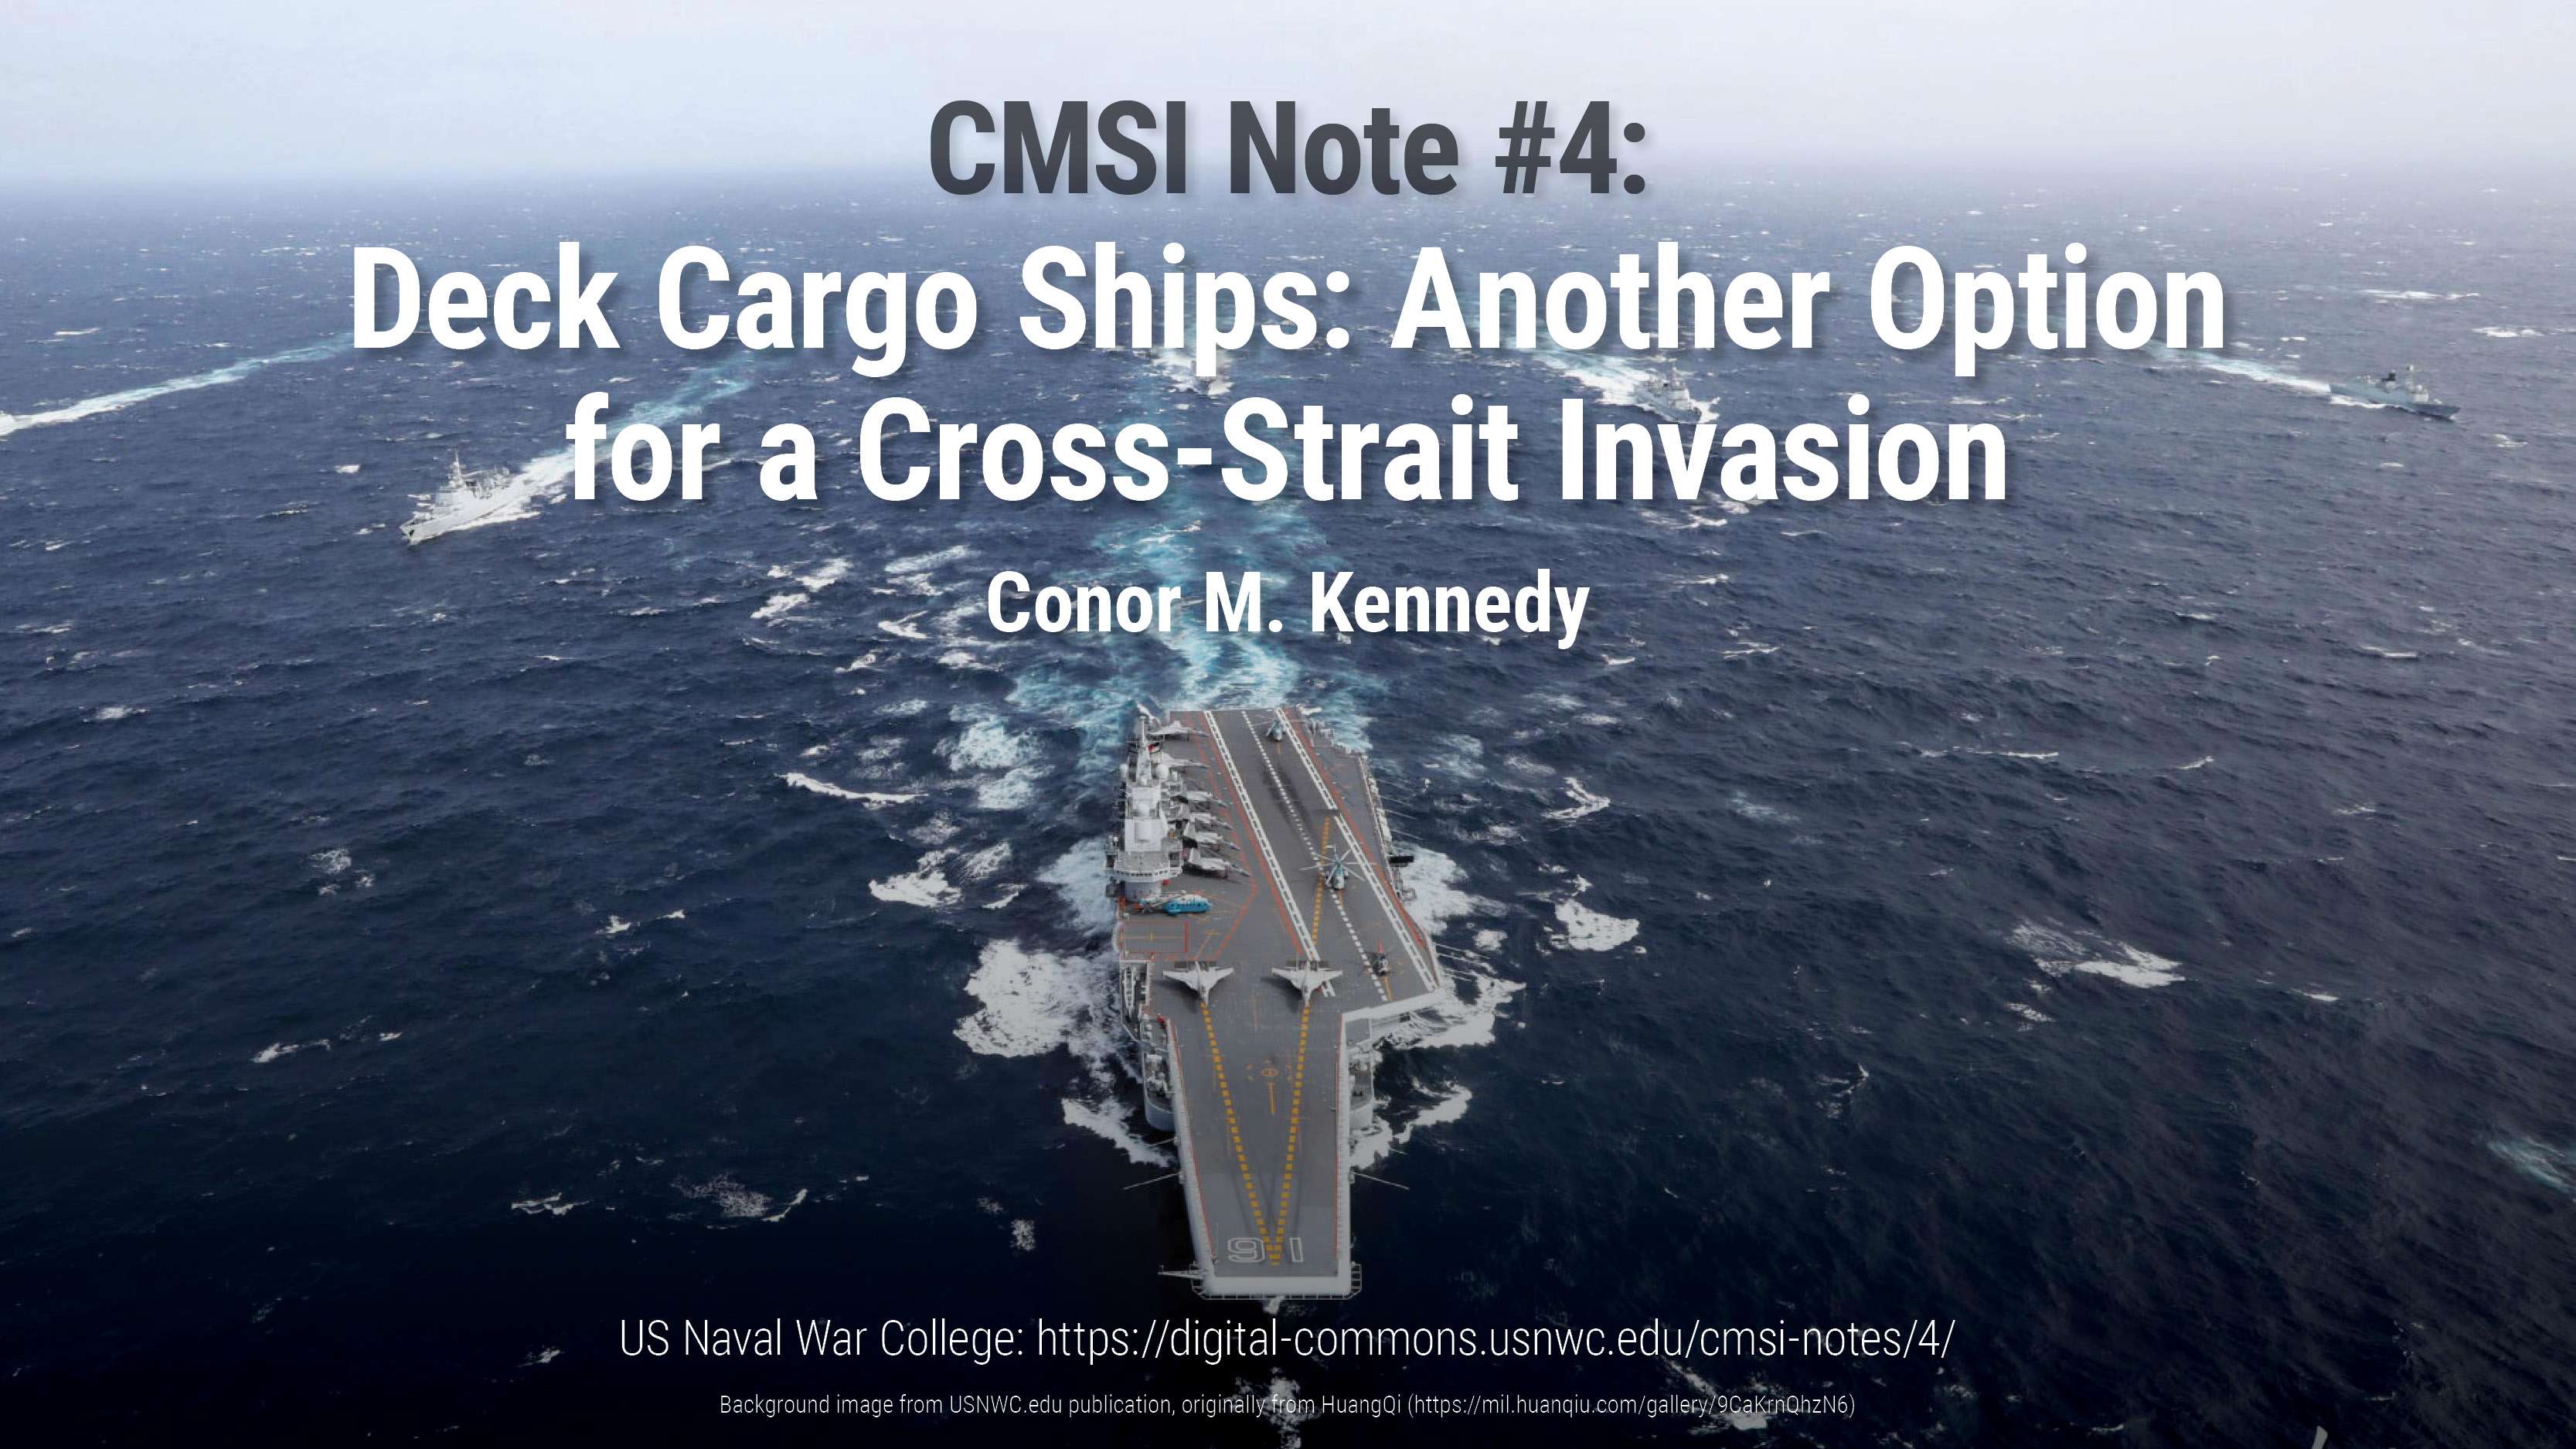 CMSI Note #4: Deck Cargo Ships: Another Option for a Cross-Strait Invasion